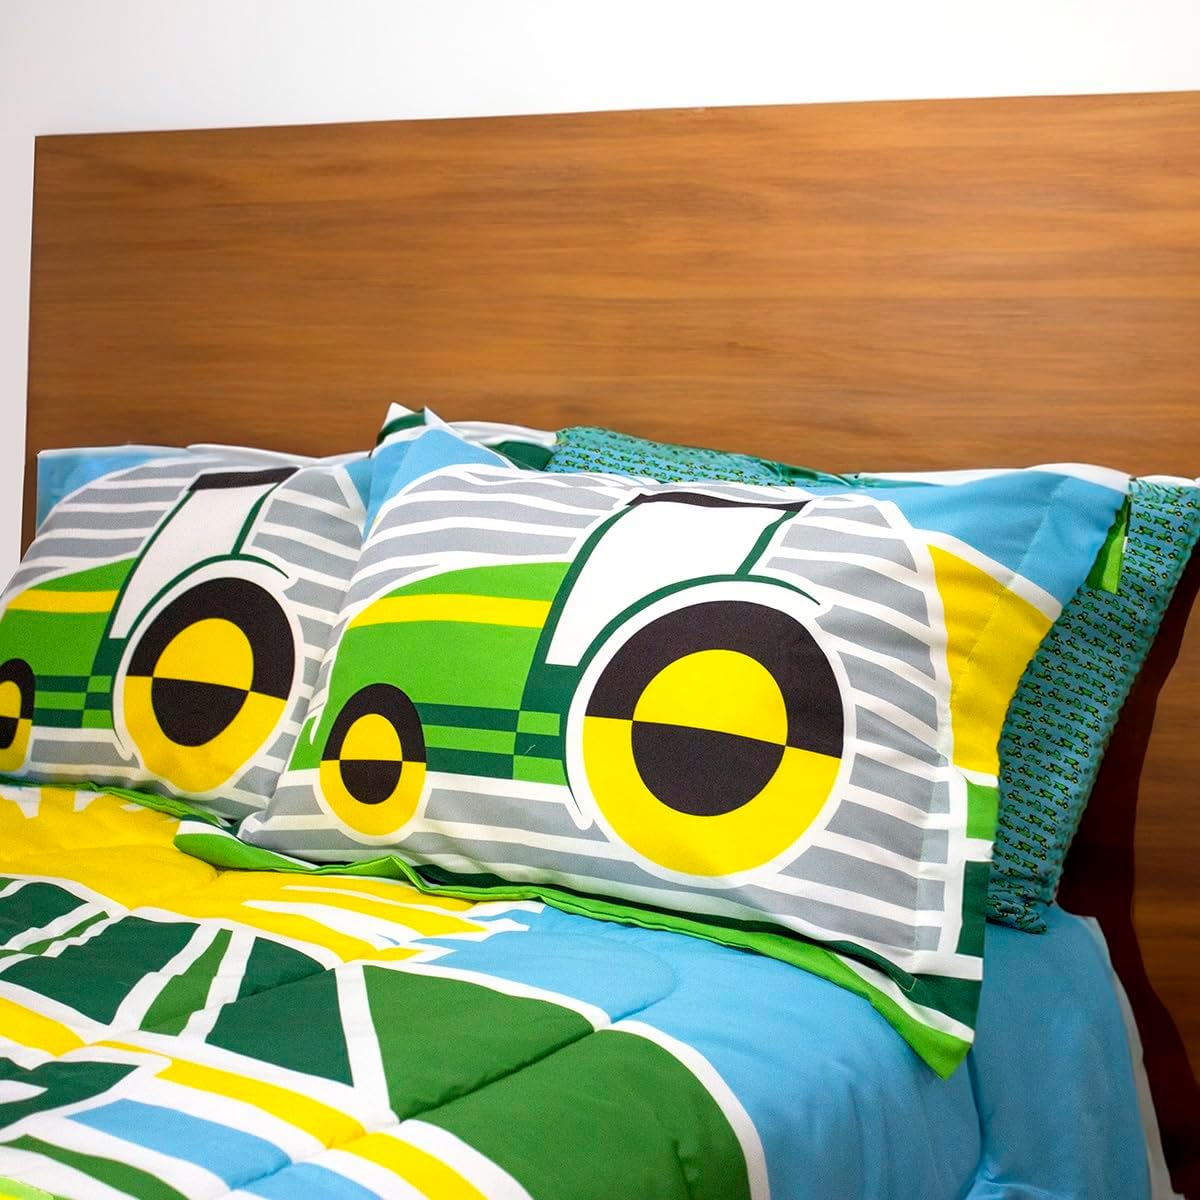 John Deere Twin Comforter Set Comes with Comforter and 1 Pillow sham